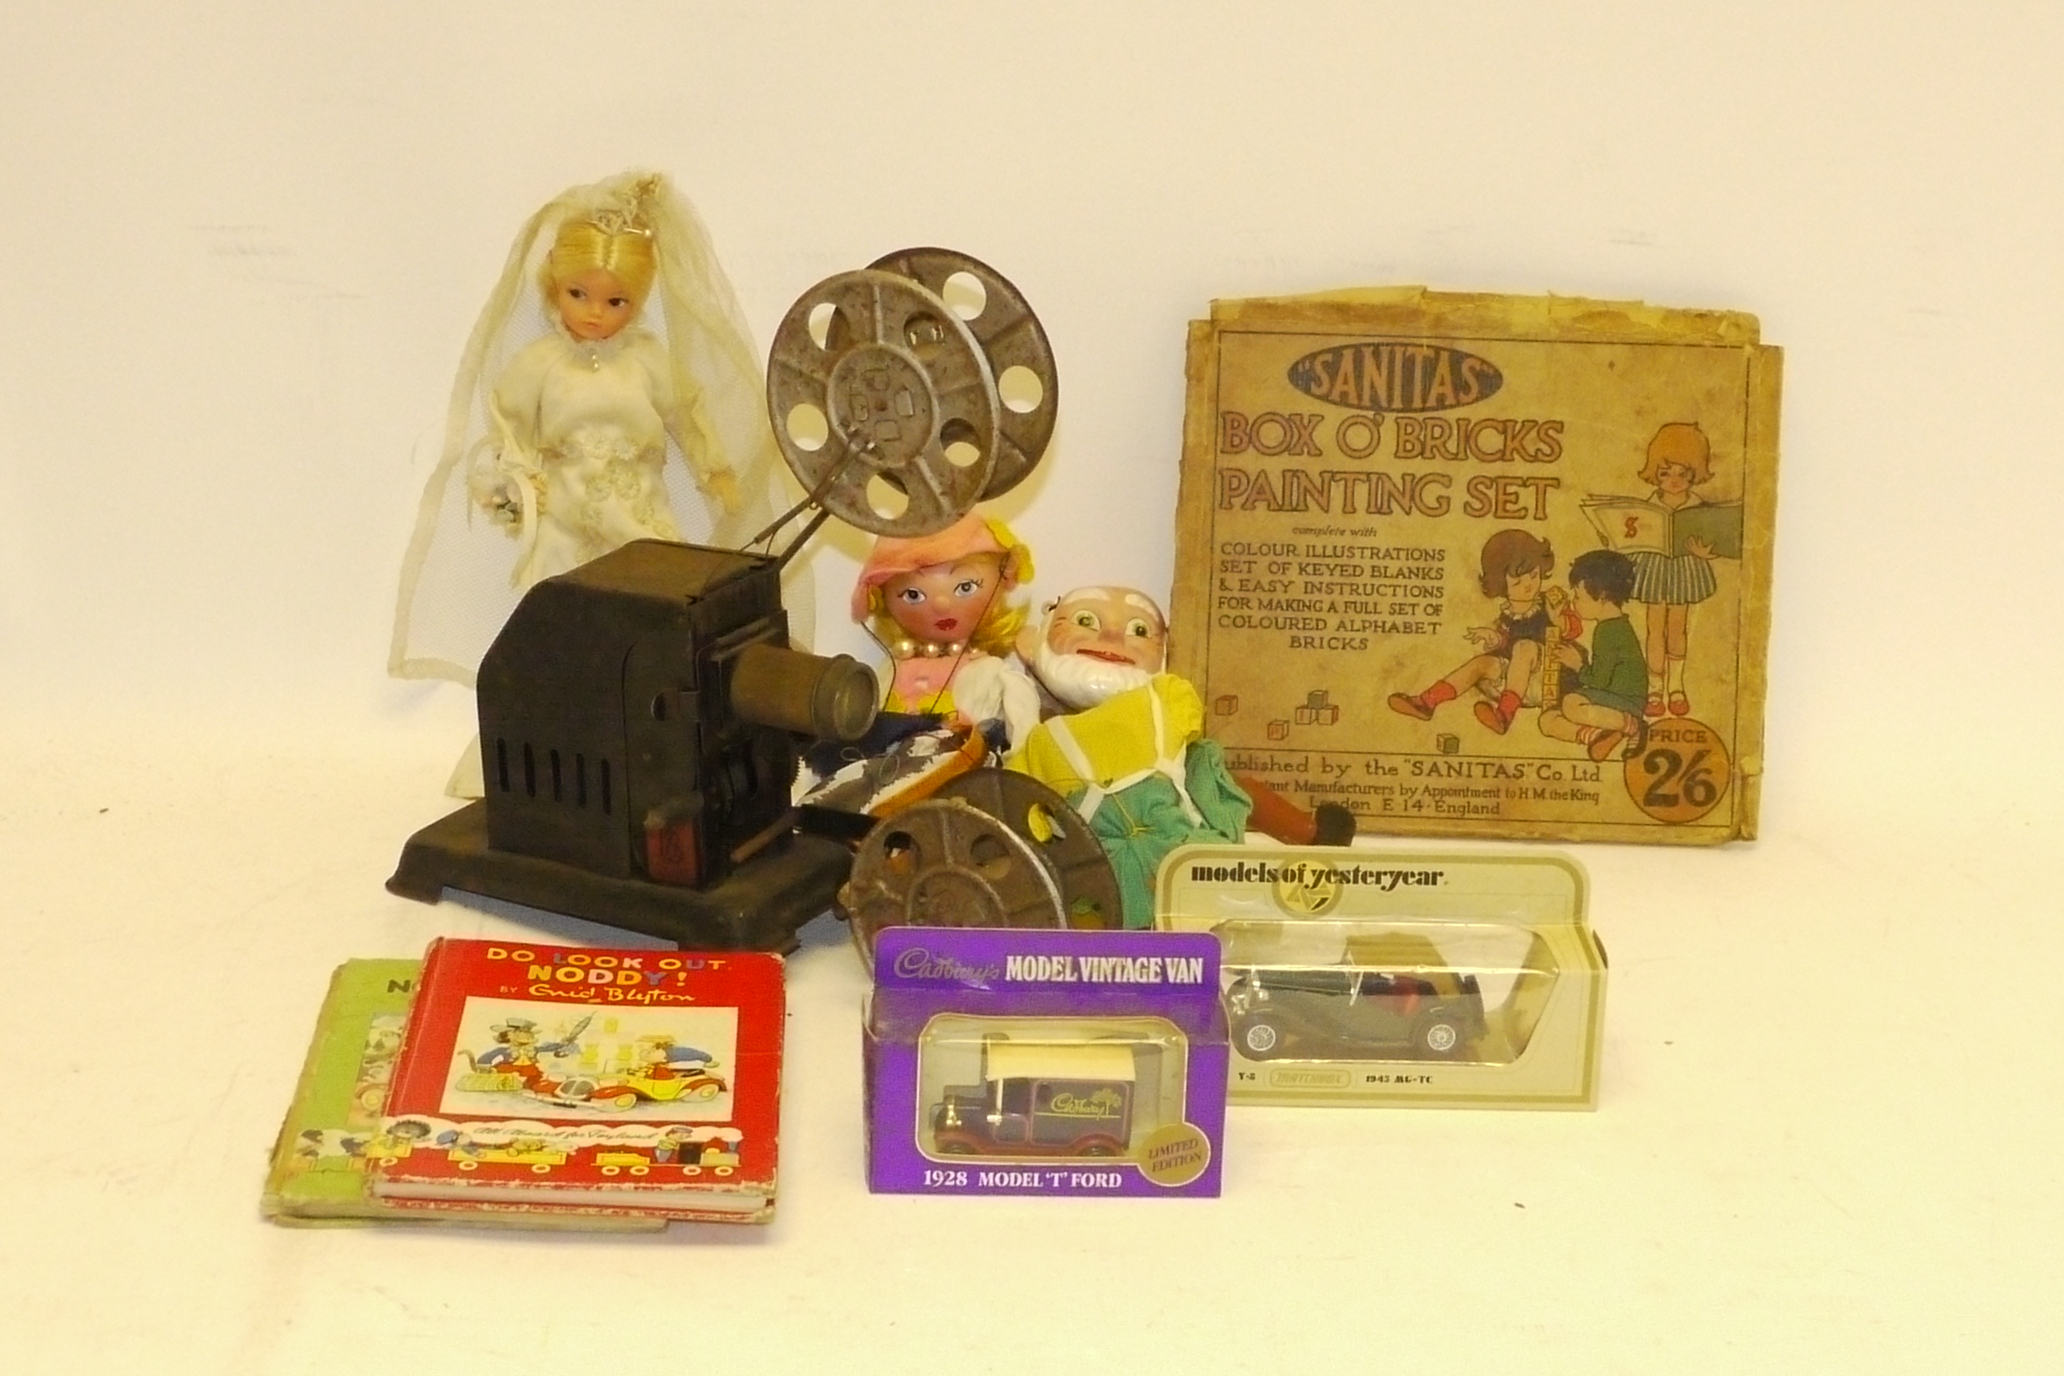 Bing British Projector, 35mm hand cranked tin toy projector with three film reels in canisters in